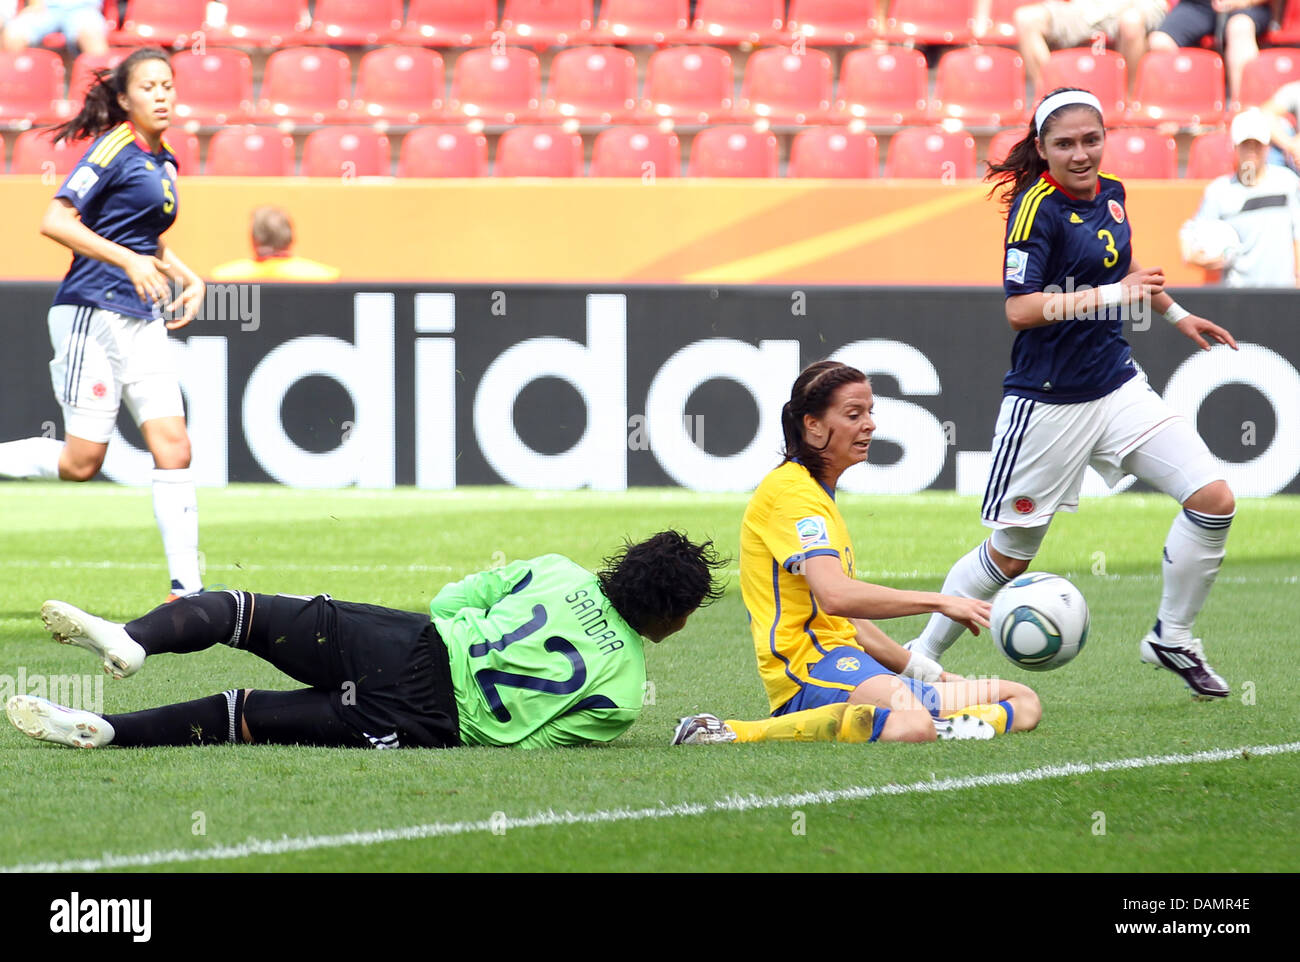 Goalkeeper Sandra Sepulveda (l) of Colombia and Lotta Schelin (M) of Sweden fight for the ball during the Group C match Colombia against Sweden of FIFA Women's World Cup soccer tournament at the FIFA Women's World Cup Stadium in Leverkusen, Germany, 28 June 2011. Foto: Friso Gentsch dpa/lnw  +++(c) dpa - Bildfunk+++ Stock Photo